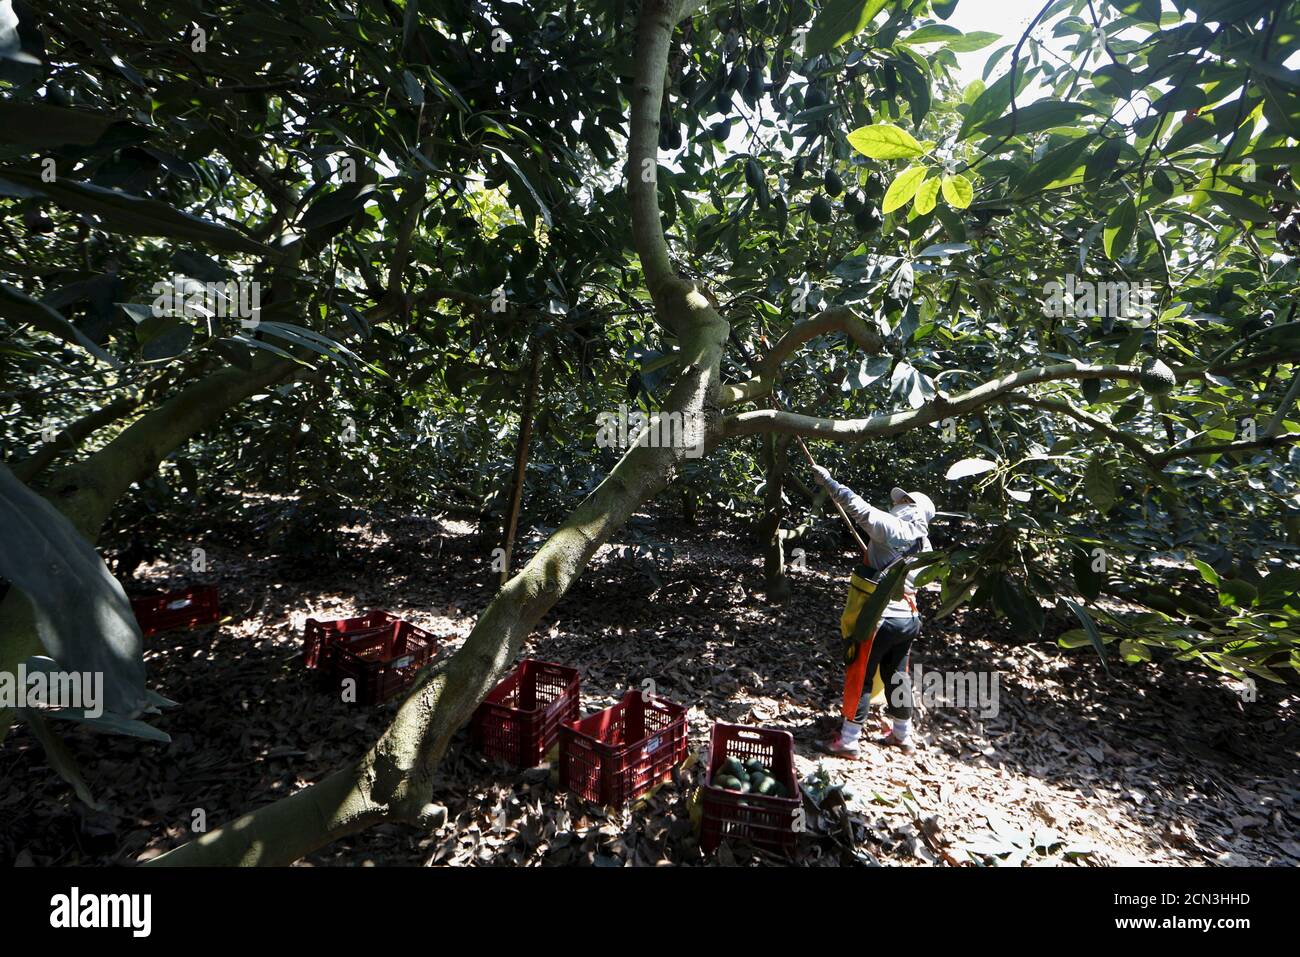 Avocados Farm High Resolution Stock Photography and Images - Alamy